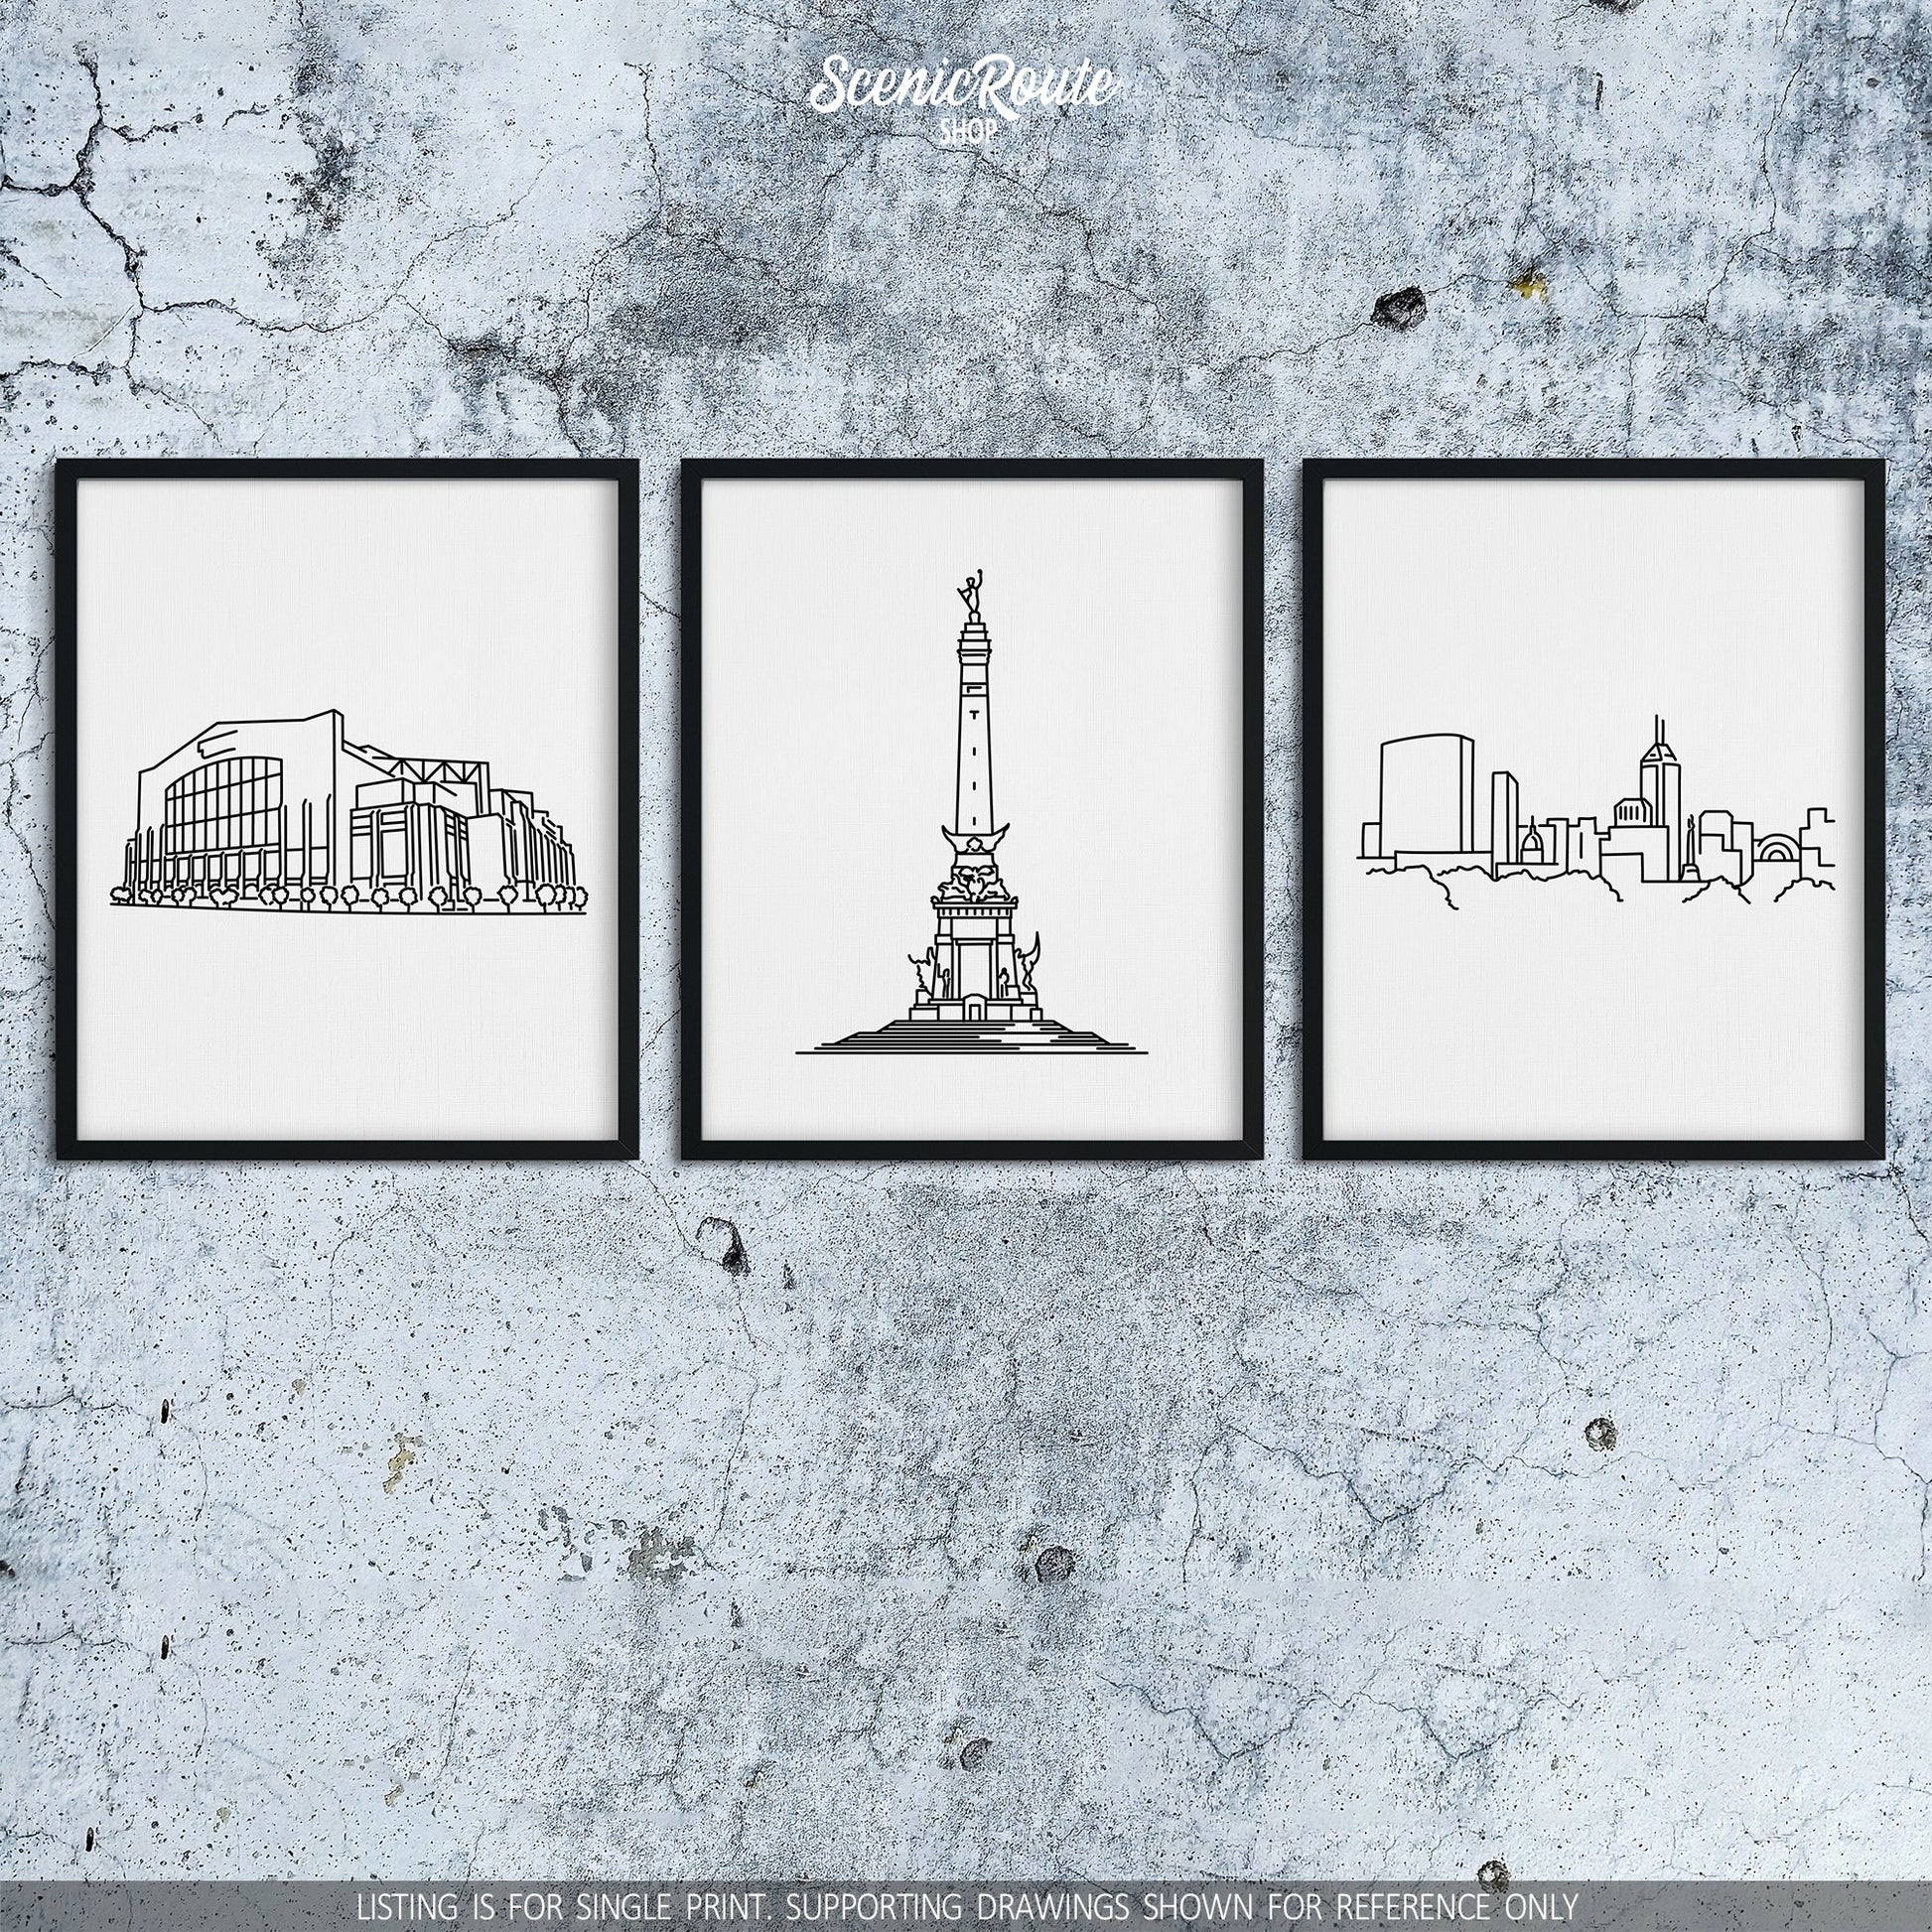 A group of three framed drawings on a concrete wall. The line art drawings include the Colts Stadium, Soldiers and Sailors Monument, and Indianapolis Skyline